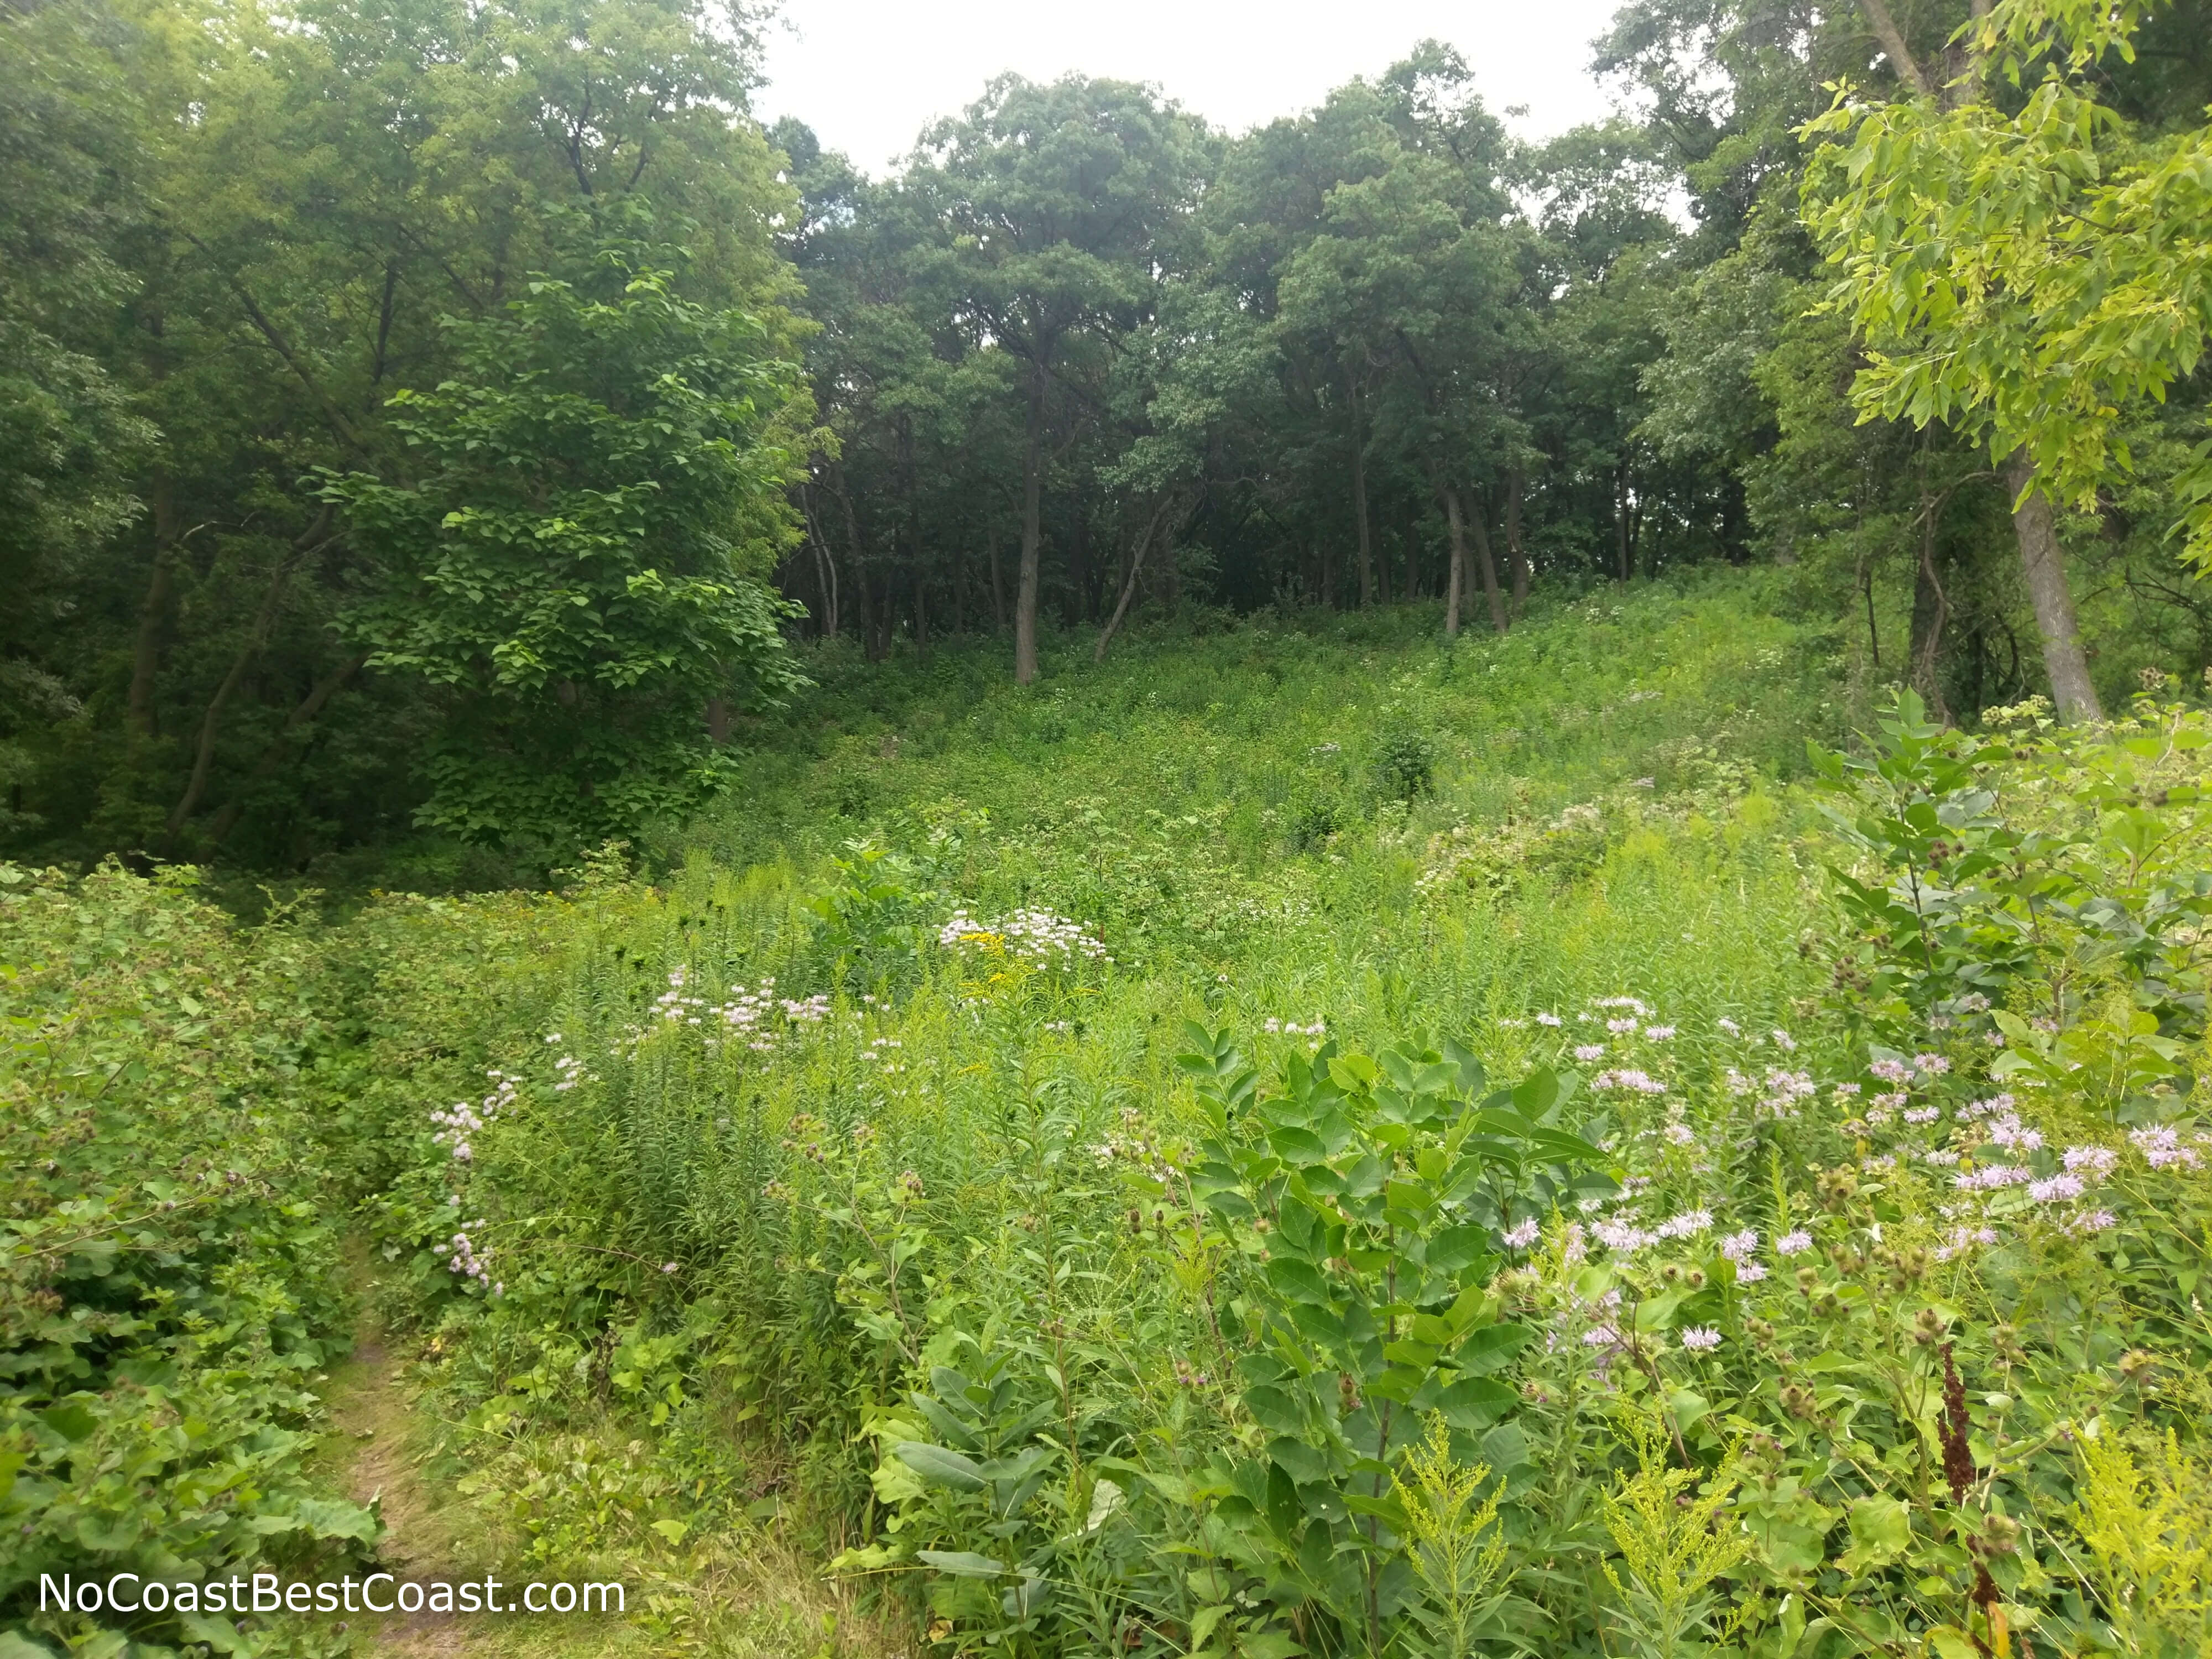 Flowers and forest in Theodore Wirth Park